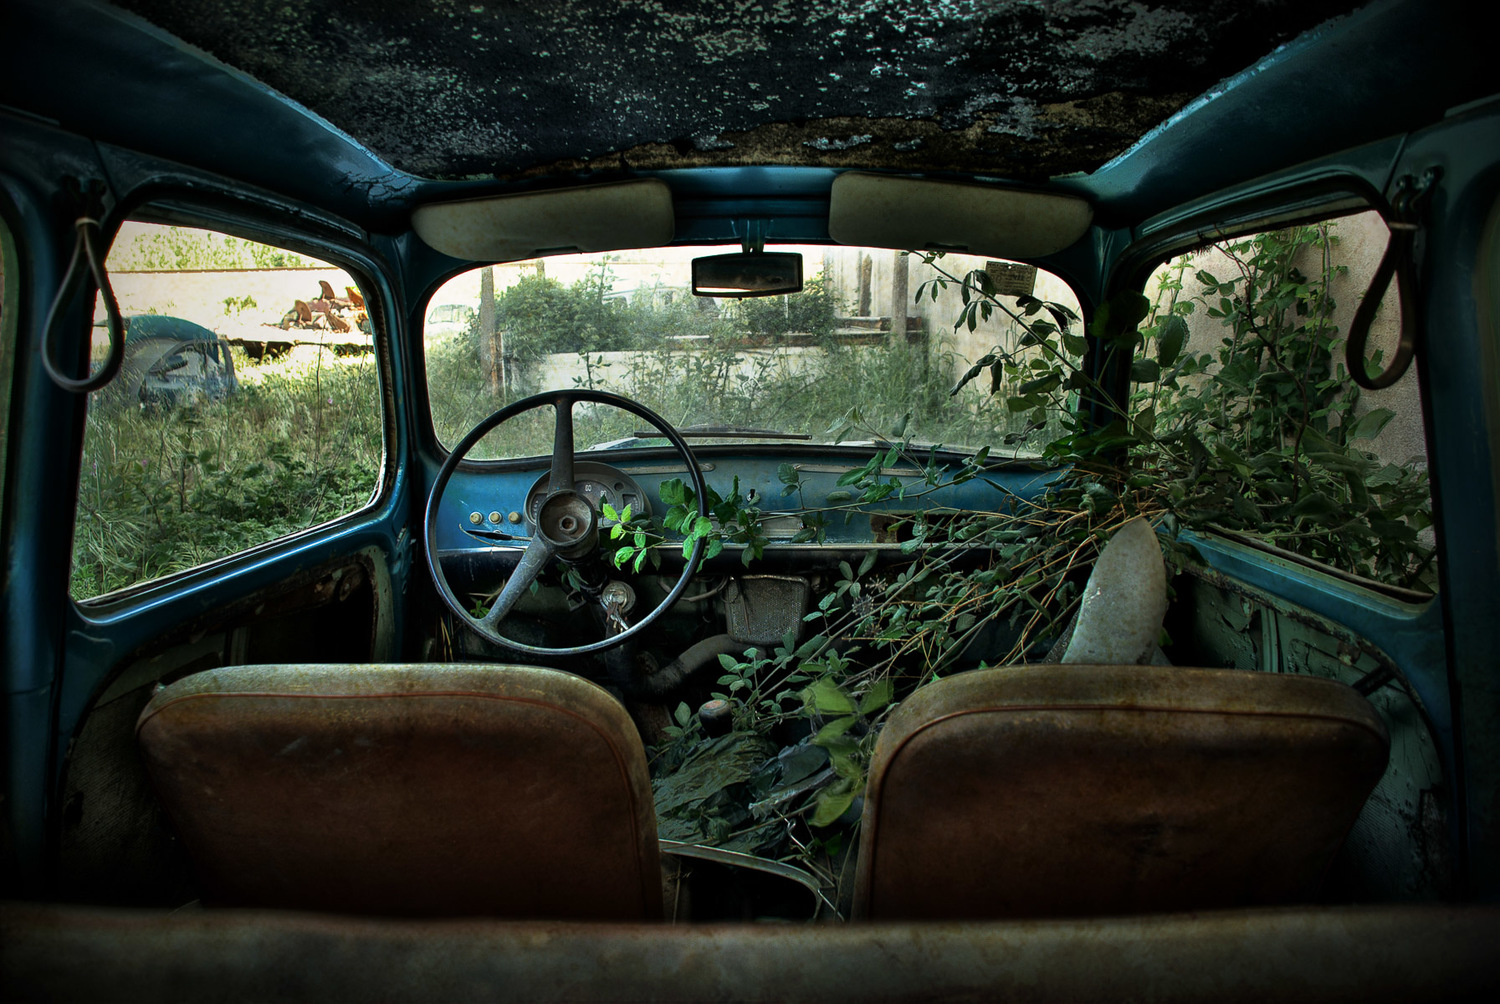 rusy-car-abandoned-in-nature.jpg